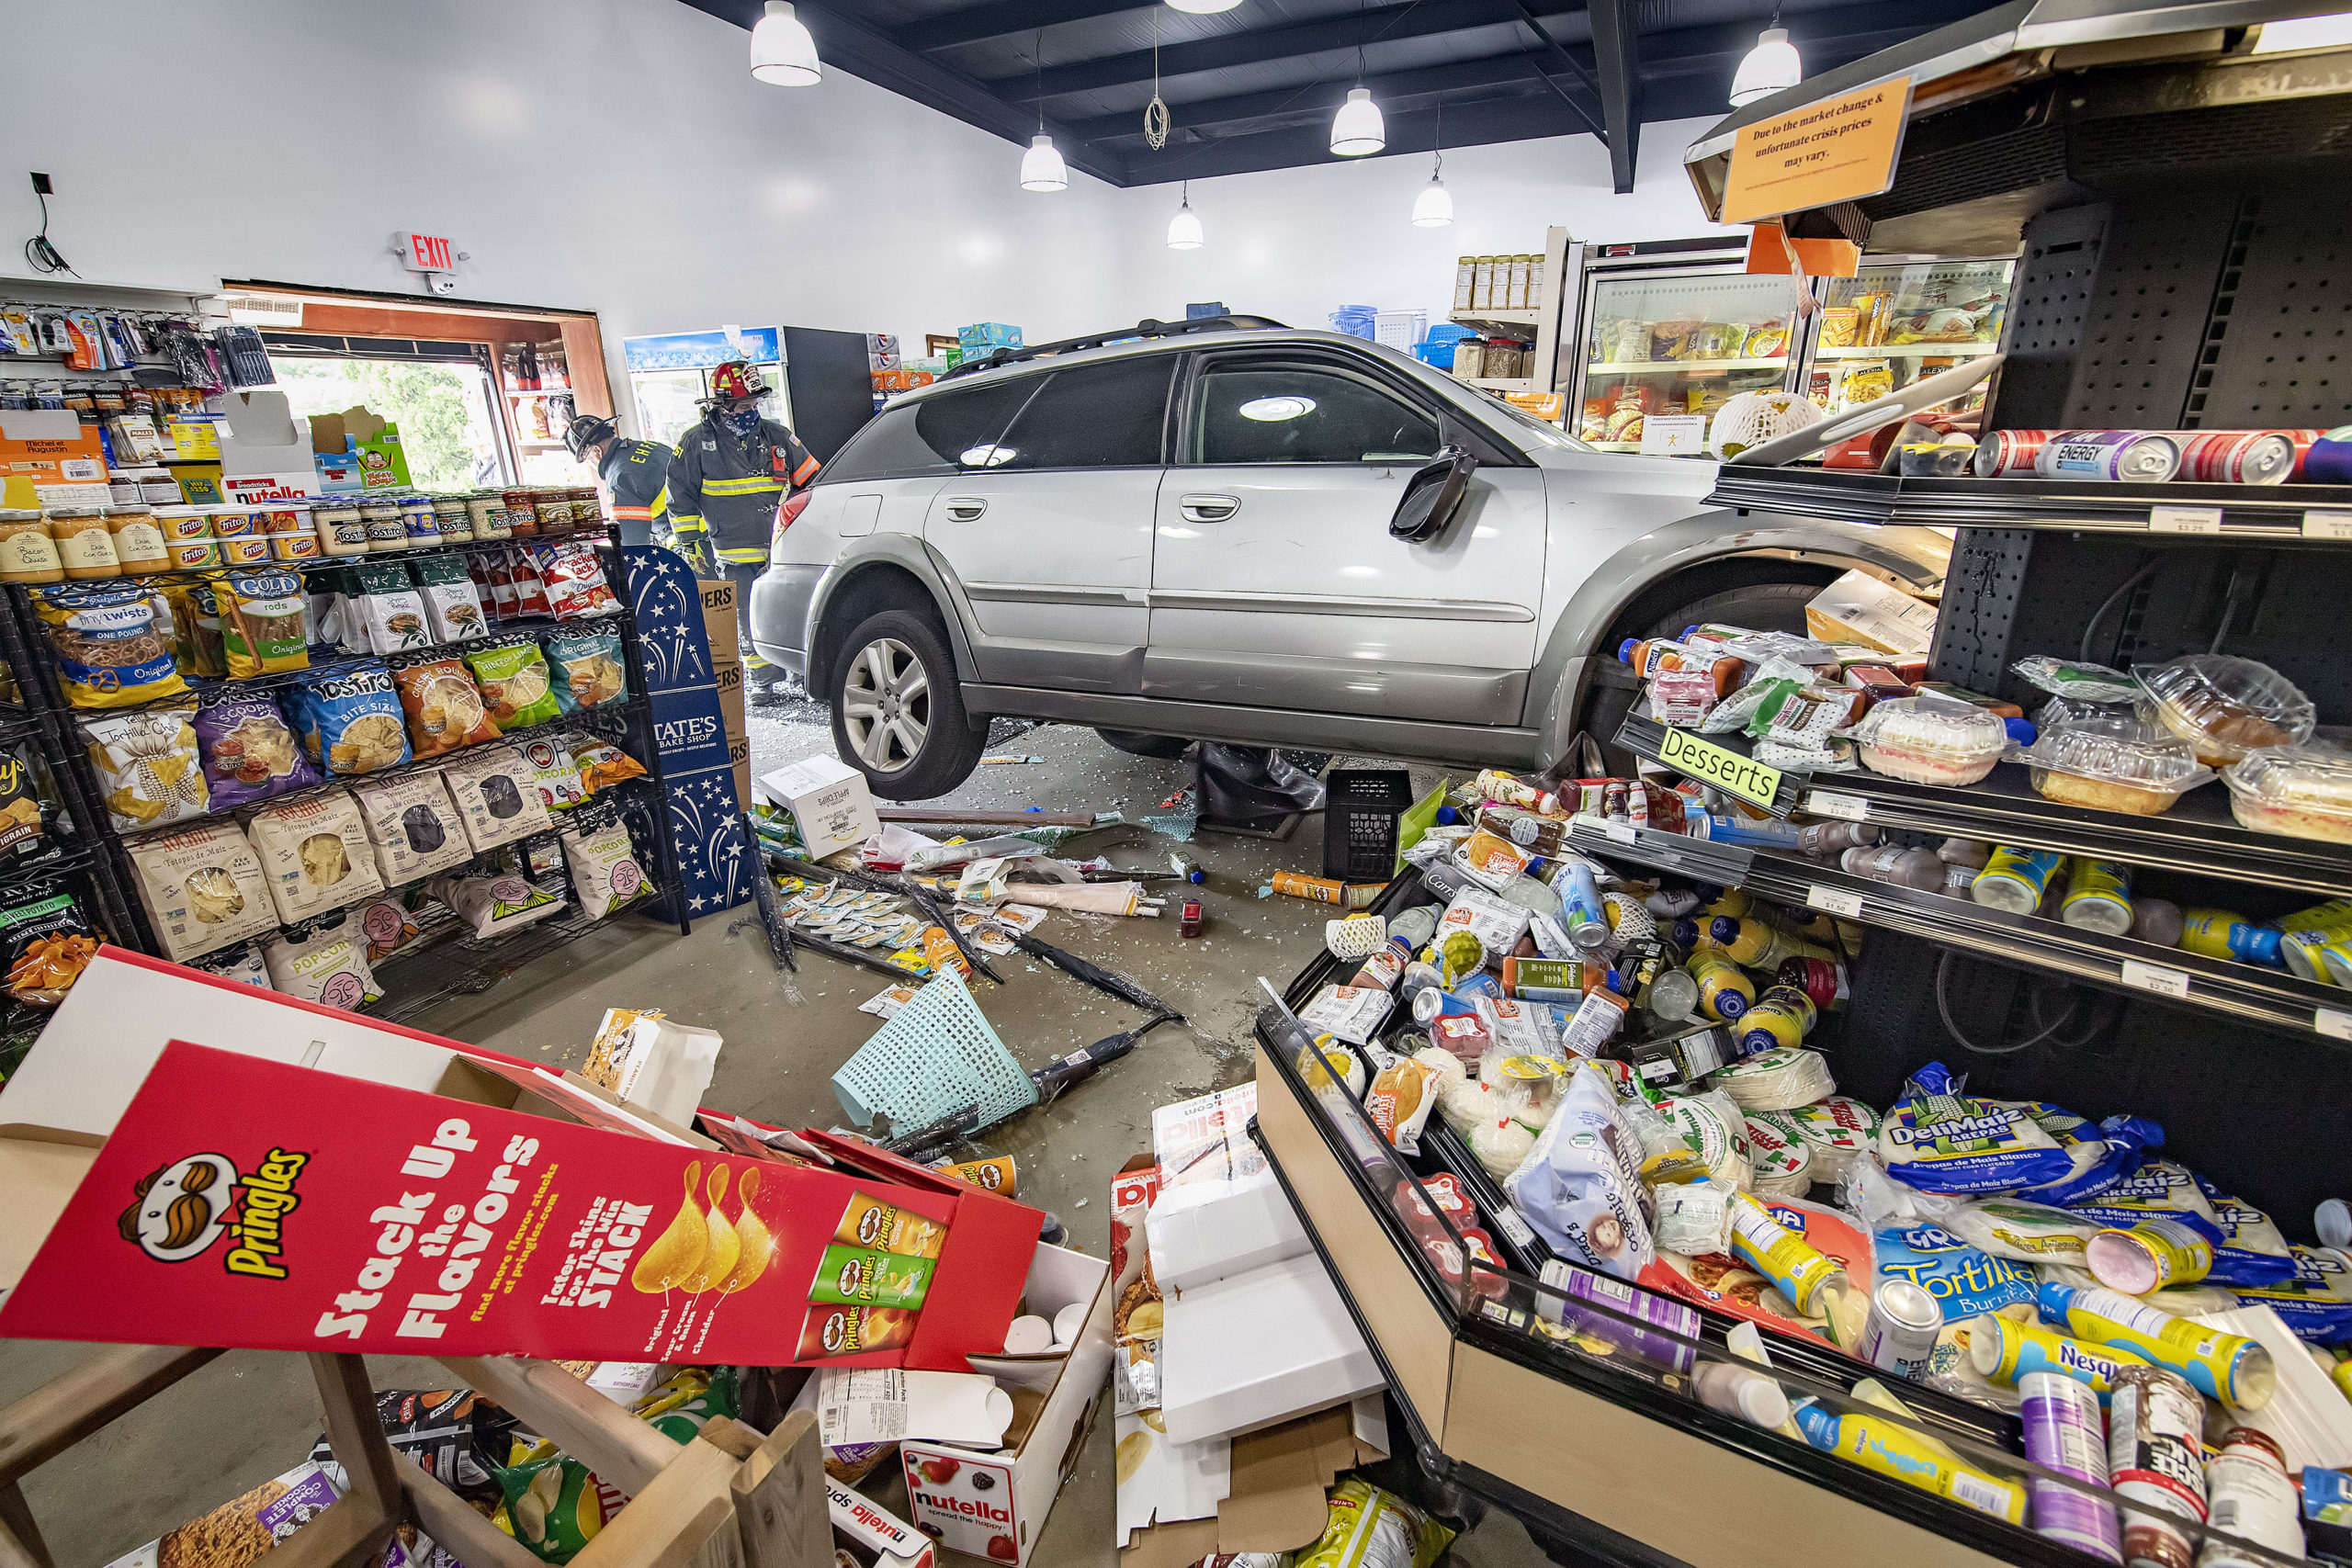 Two people suffered minor injuries when an car smashed through the front of the East Hampton Market on Race Lane. 